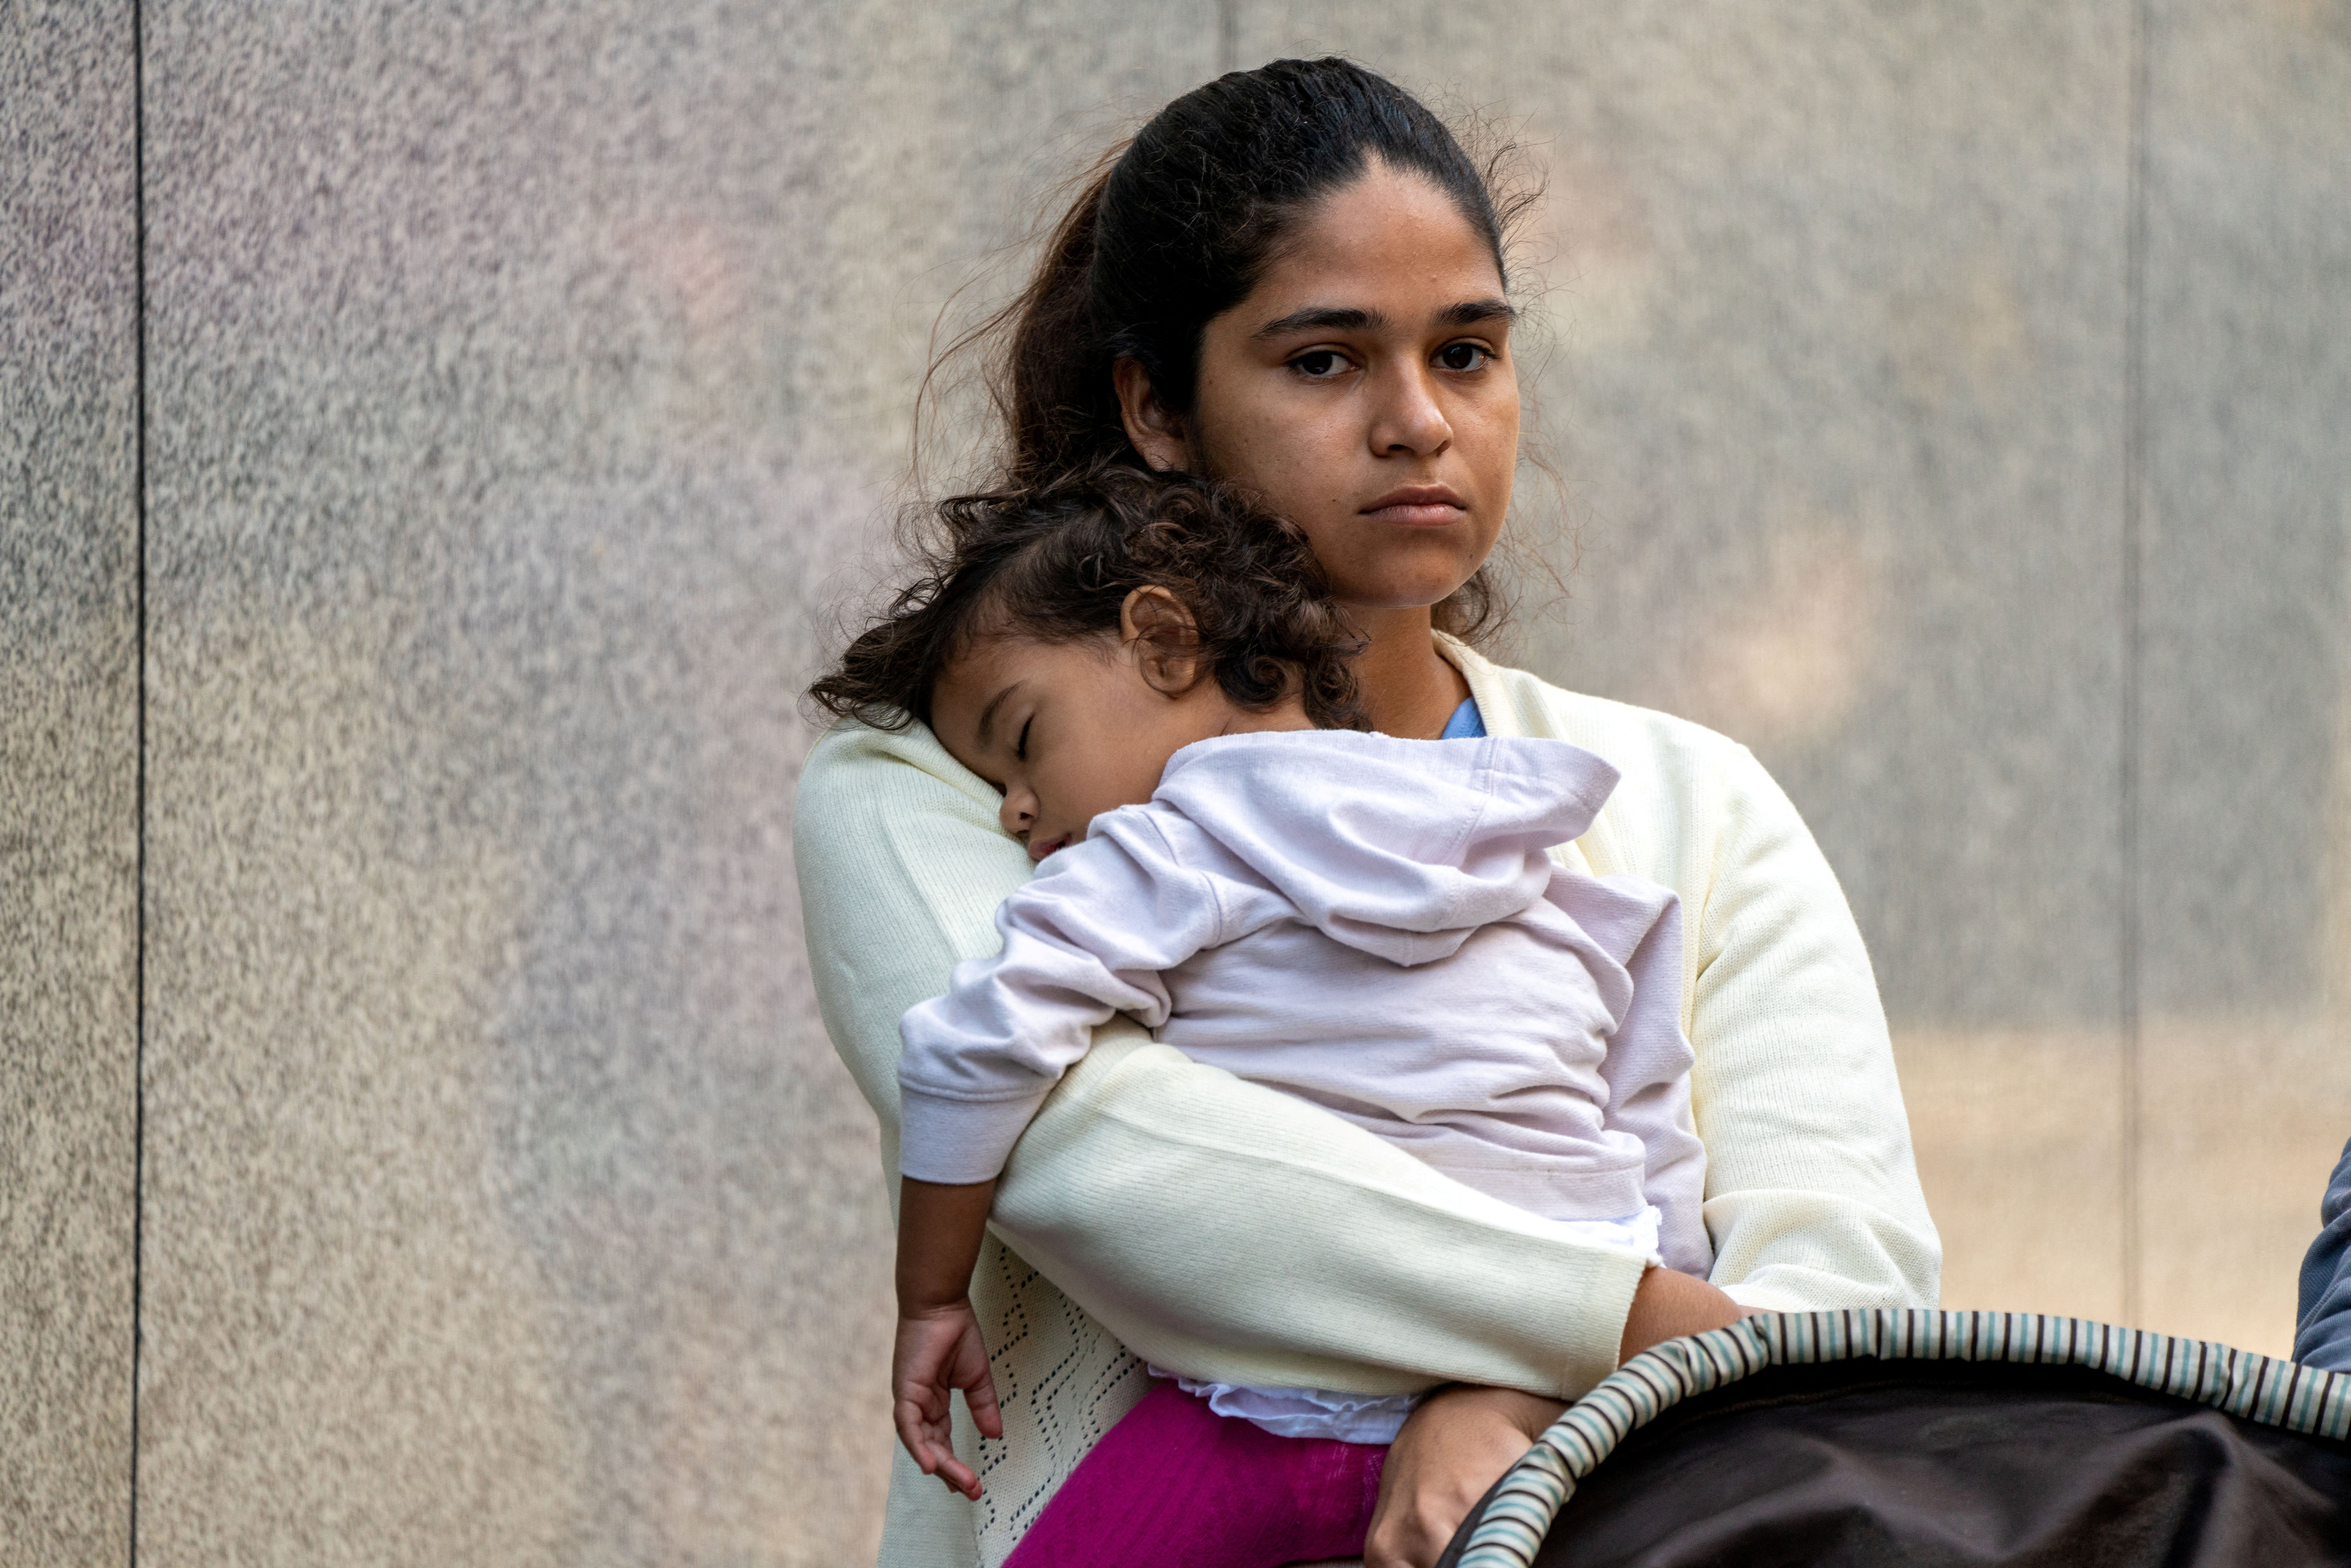 A migrant and her daughter wait for aid outside the offices of Catholic Charities Aug. 16, 2022, after being transported via charter bus from Texas. Catholic Charities USA responded Oct. 31, 2023, to "disturbing" recent remarks by a social media influencer threatening its staff for assisting migrants with basic humanitarian needs after they have been released into the country by federal authorities. (OSV News photo/David Delgado, Reuters)